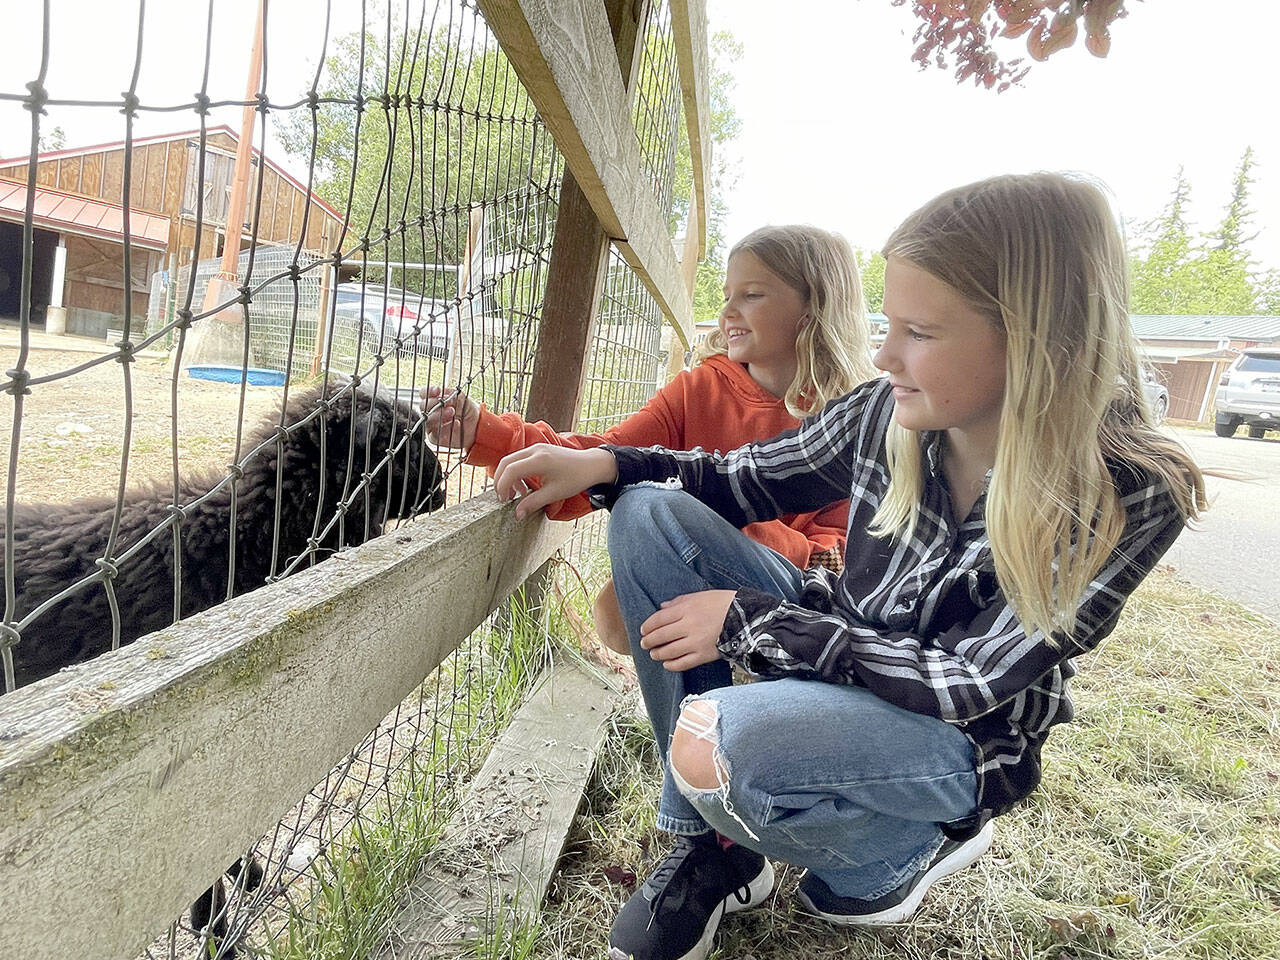 Skylar, 8, left, and Farra Grieves, 10, pet Joaquin the lamb Saturday at Center Valley Animal Rescue’s open house. The nonprofit takes in and rehabilitates pets, livestock, birds and wildlife at its 30-acre facility in Quilcene. It acquired Joaquin, who has a facial deformity, when he was rejected by his mother at birth. (Paula Hunt/Peninsula Daily News)